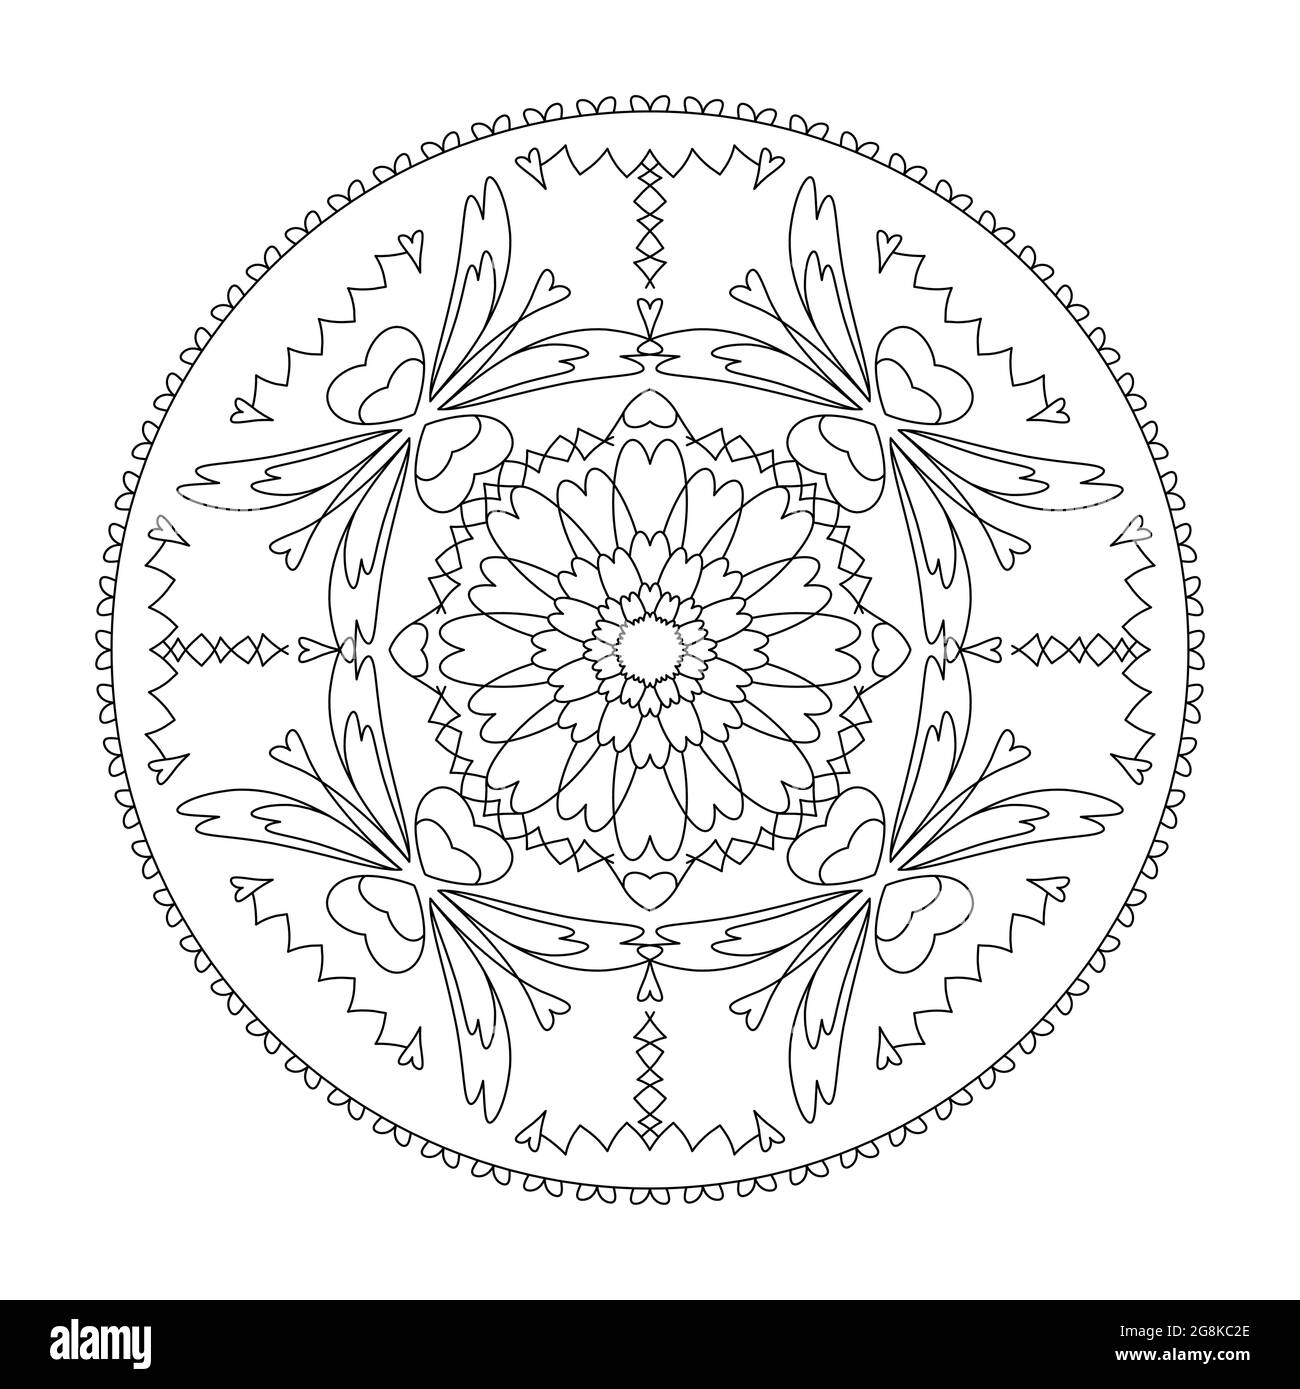 Mandala. Stretched hearts. Anti-stress coloring page. Vector illustration black and white. Stock Vector